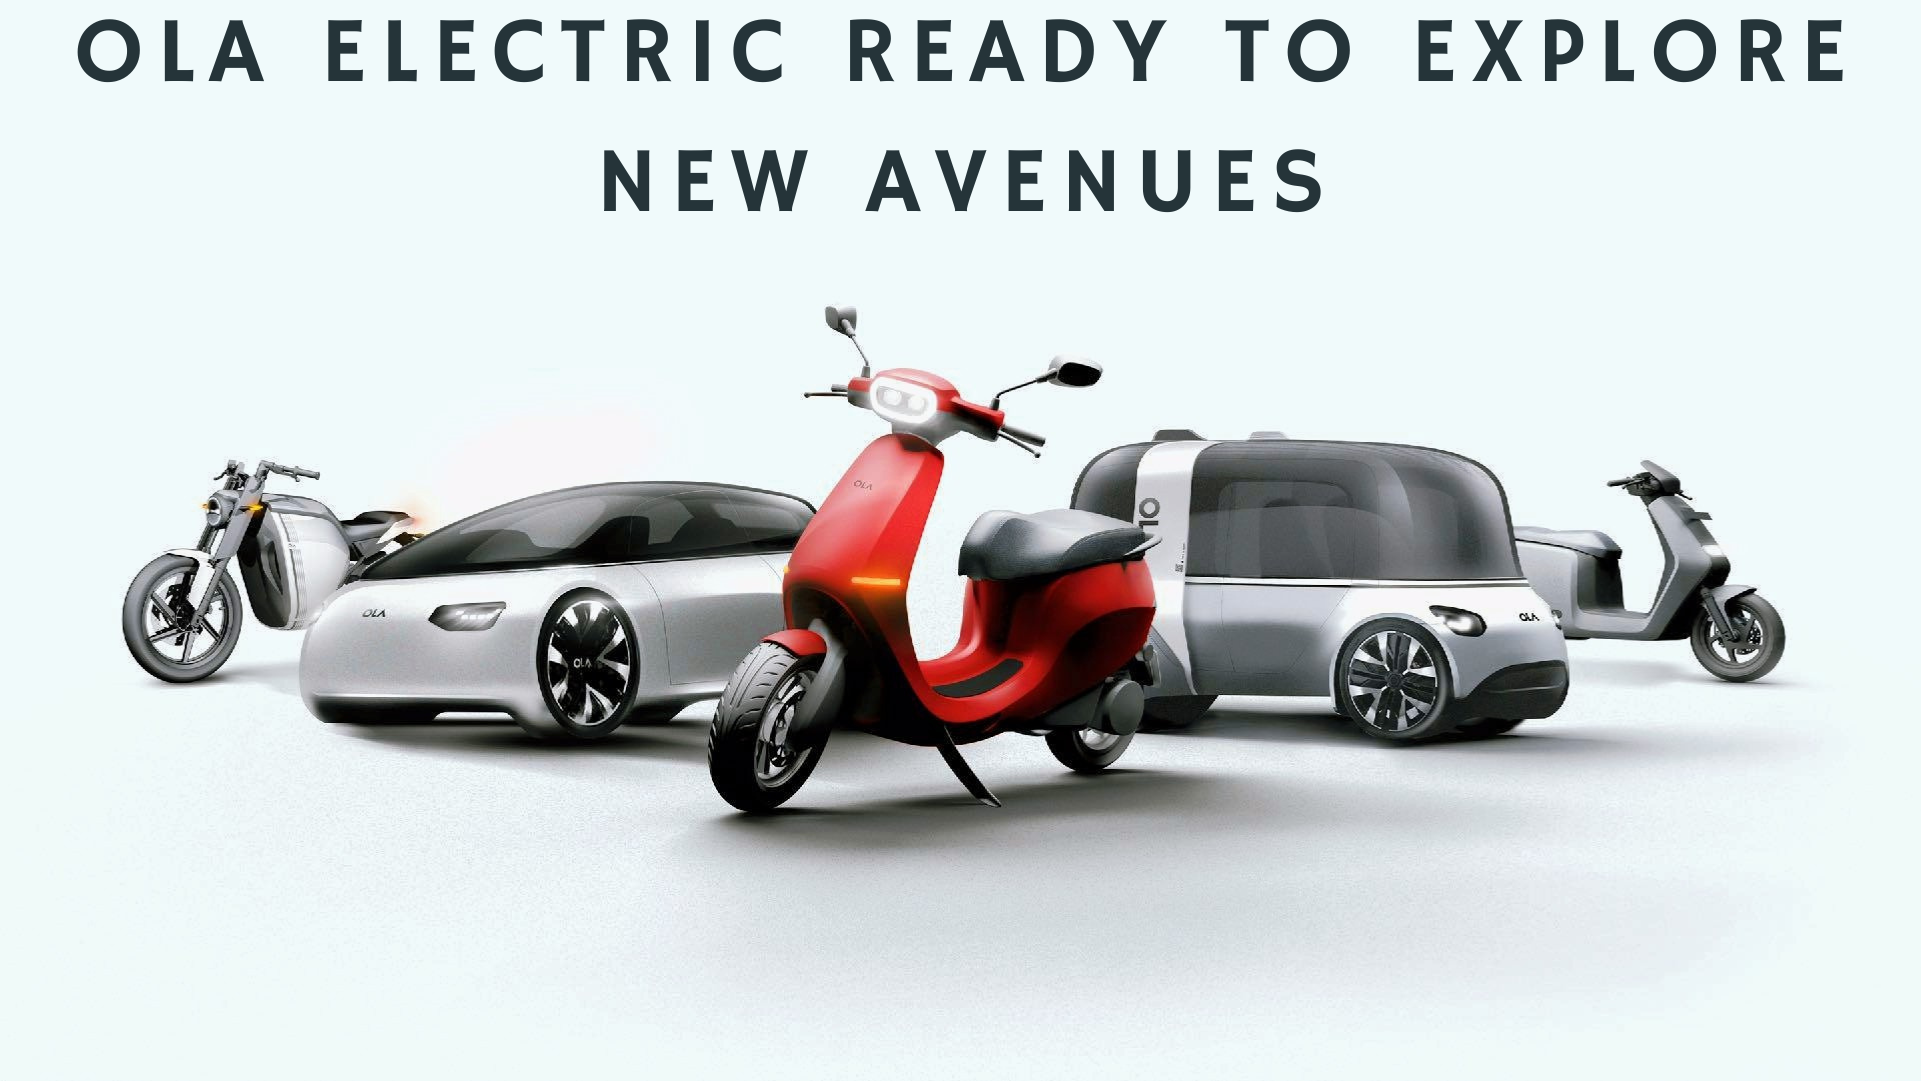 https://e-vehicleinfo.com/bhavish-aggarwal-shared-future-product-lineup-for-ola-electric/